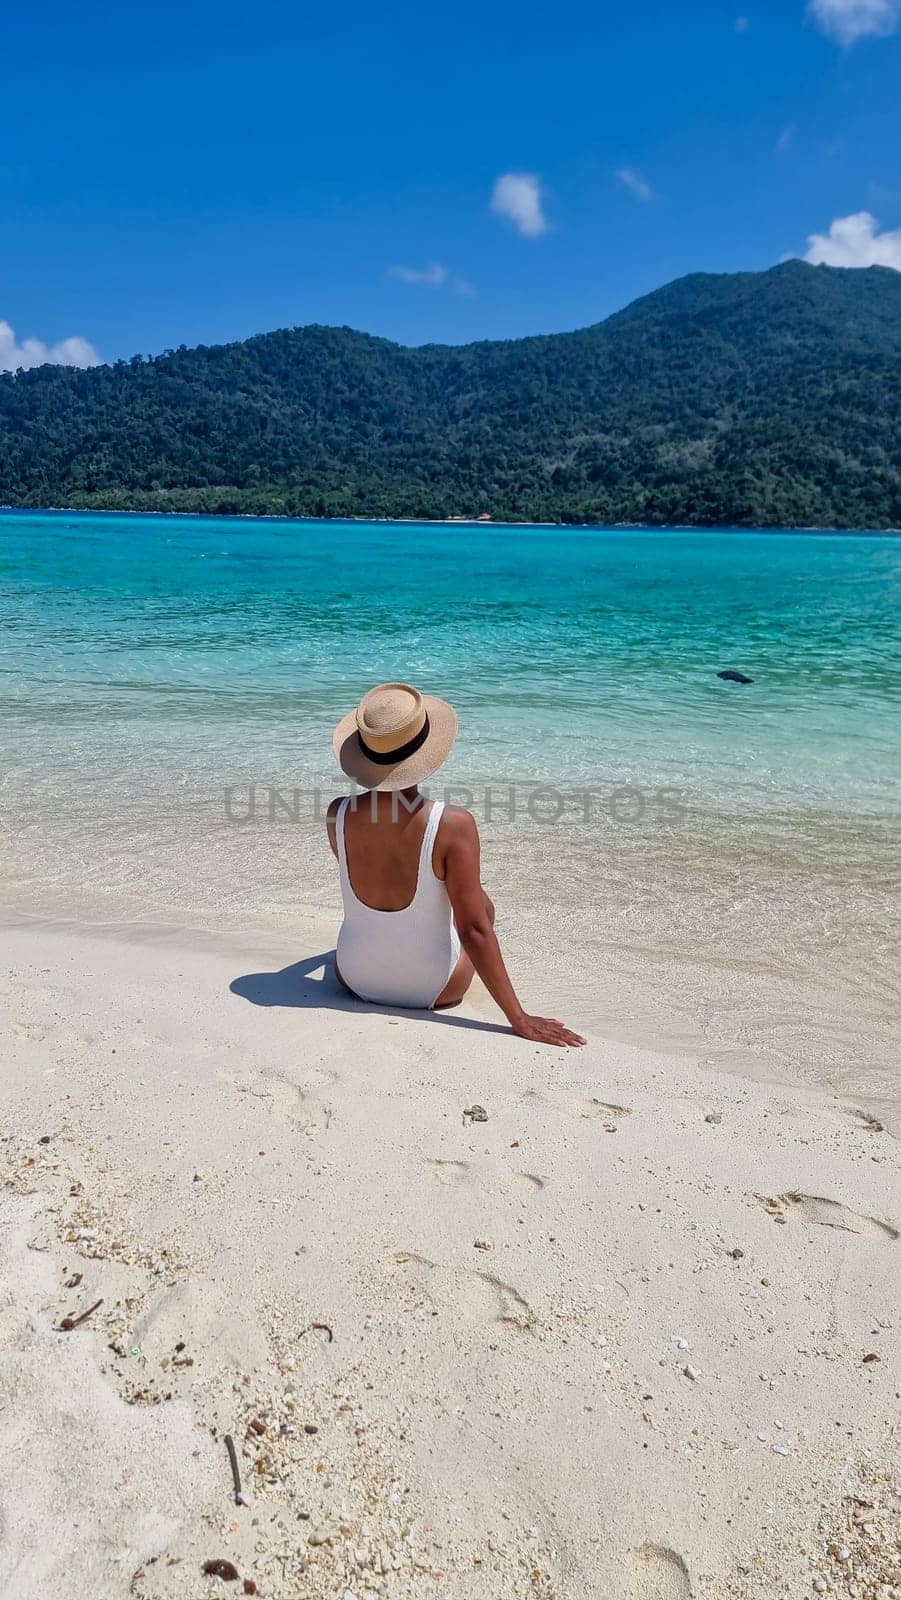 Koh Lipe Island Southern Thailand with turqouse colored ocean and white sandy beach at Ko Lipe. a women on vacation in Thailand walking at the beach